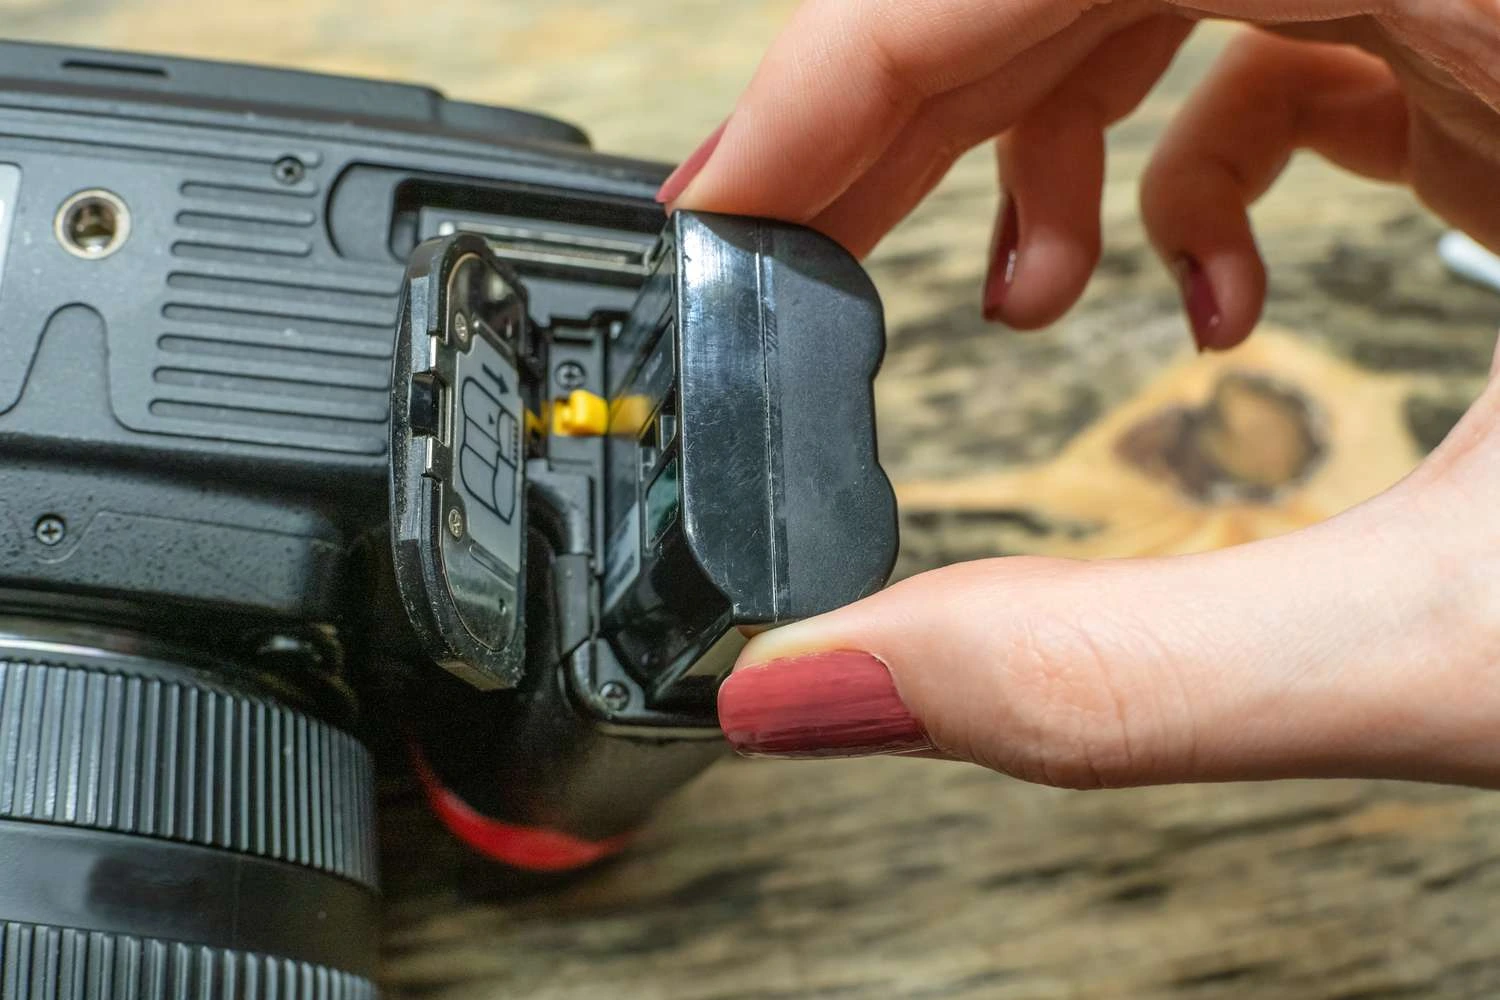 Keep camera batteries separate and away from each other